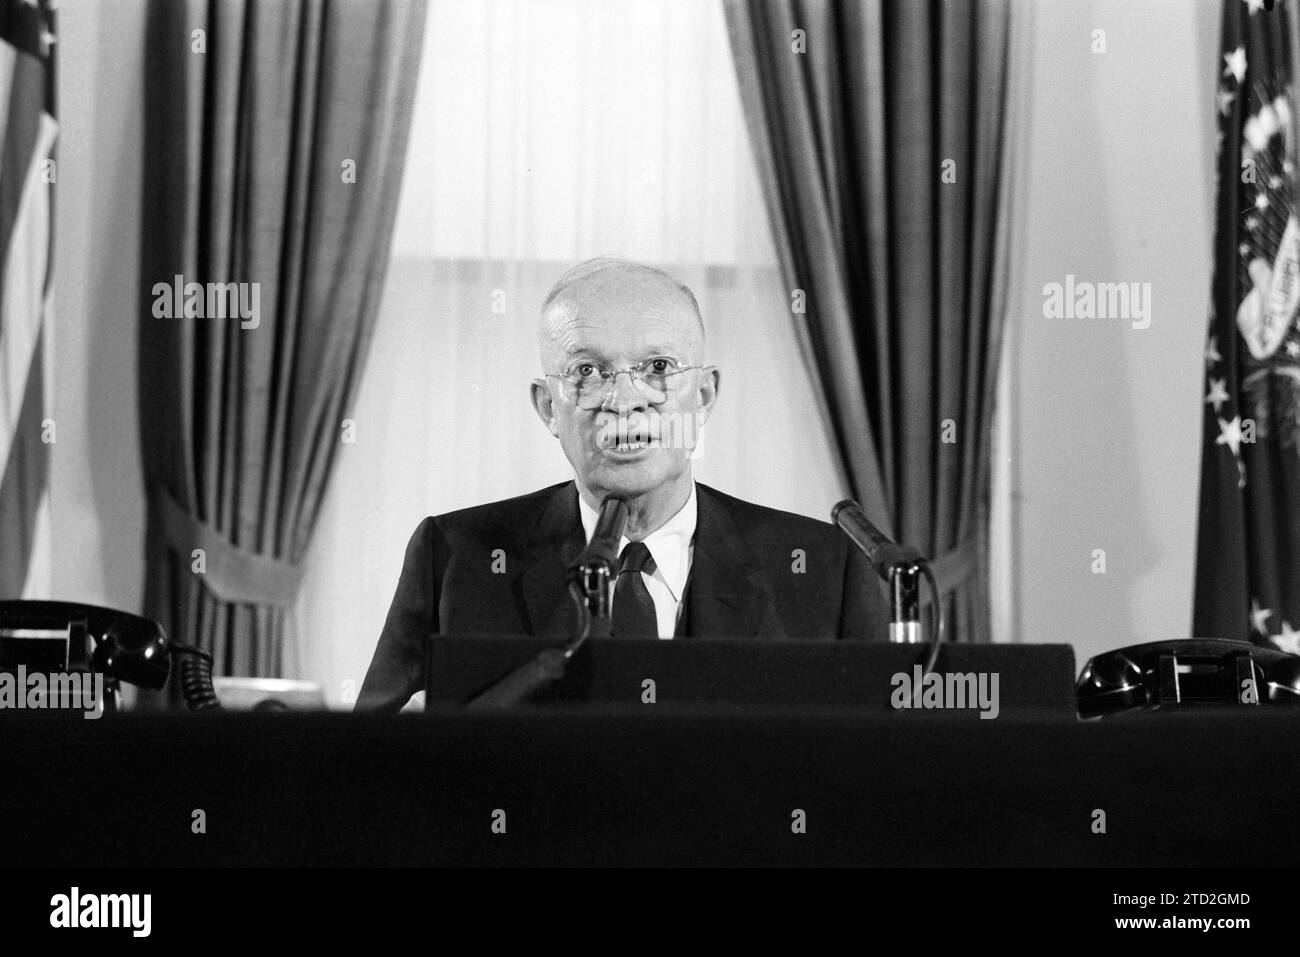 U.S. President Dwight D. Eisenhower delivering speech about US military intervention in Lebanon, White House, Washington, D.C., USA, Marion S. Trikosko, U.S. News & World Report Magazine Photograph Collection, July 4, 1958 Stock Photo